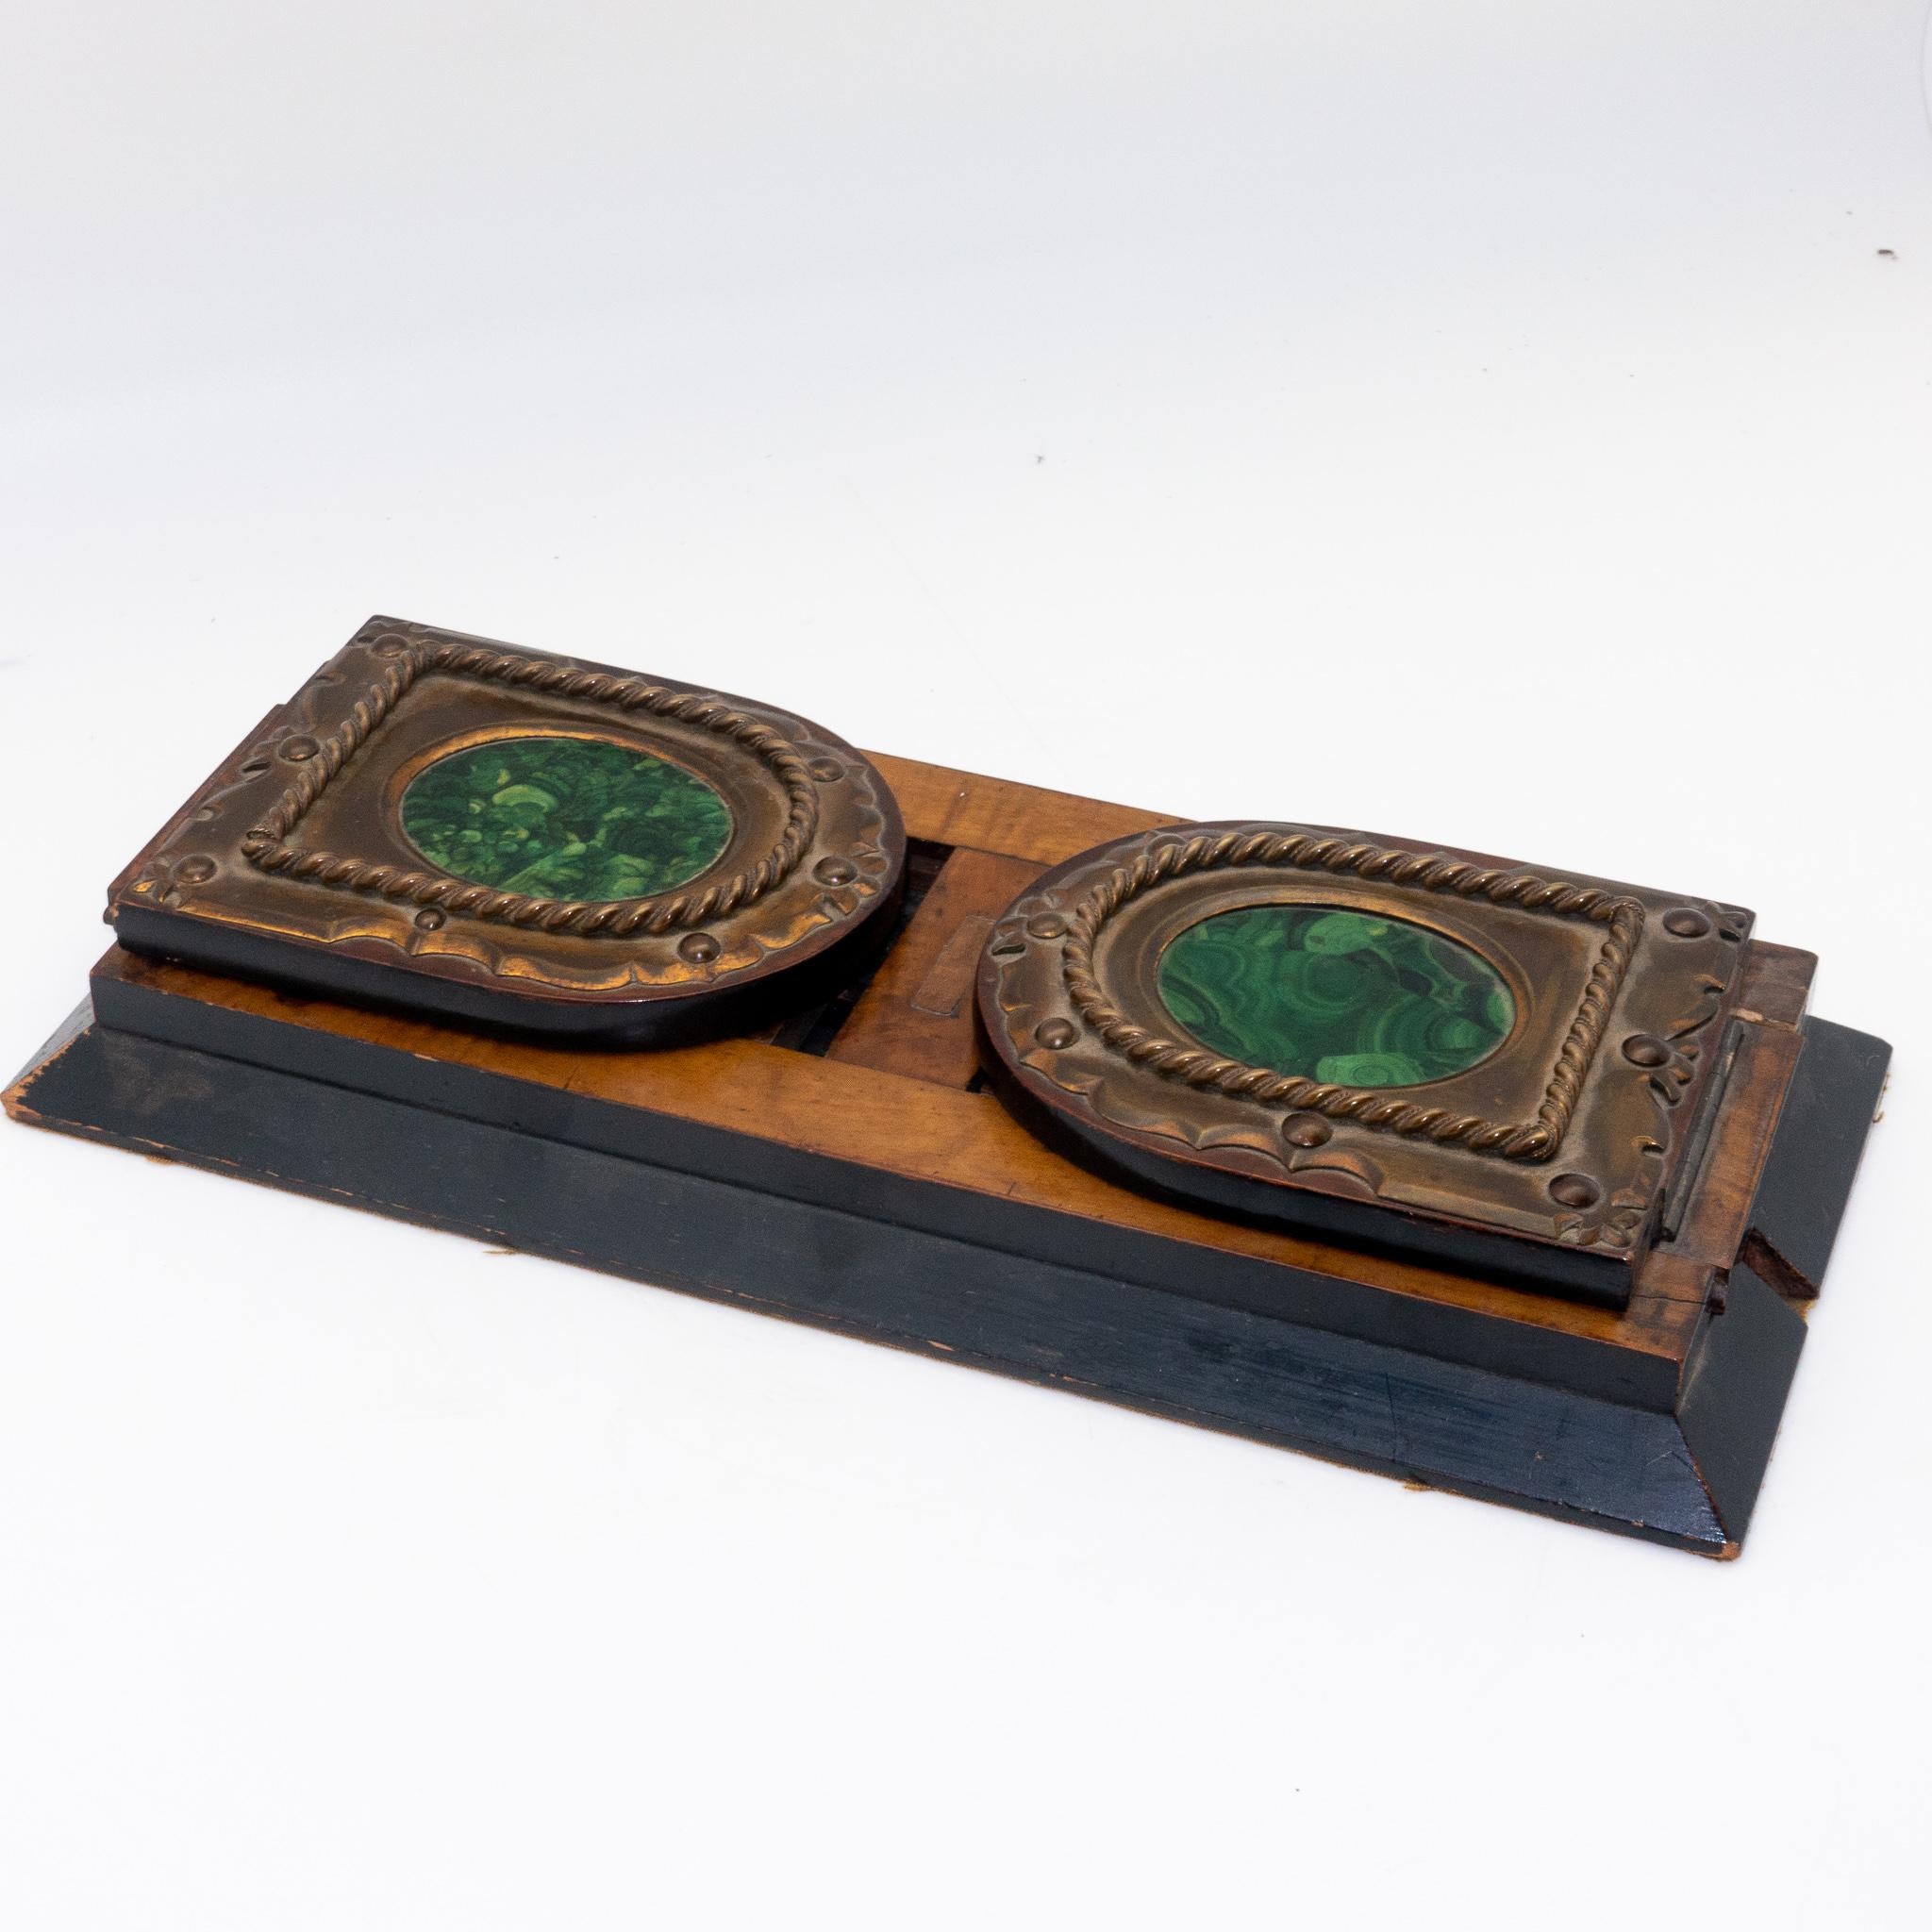 A beautiful Victorian brass-mounted Coromandel wood sliding book rack with inset malachite plaques. Made to the Betjemanns patented slide design; engraved with patent number 10597.

In 1812 and at the age of 14, George Betjemann started